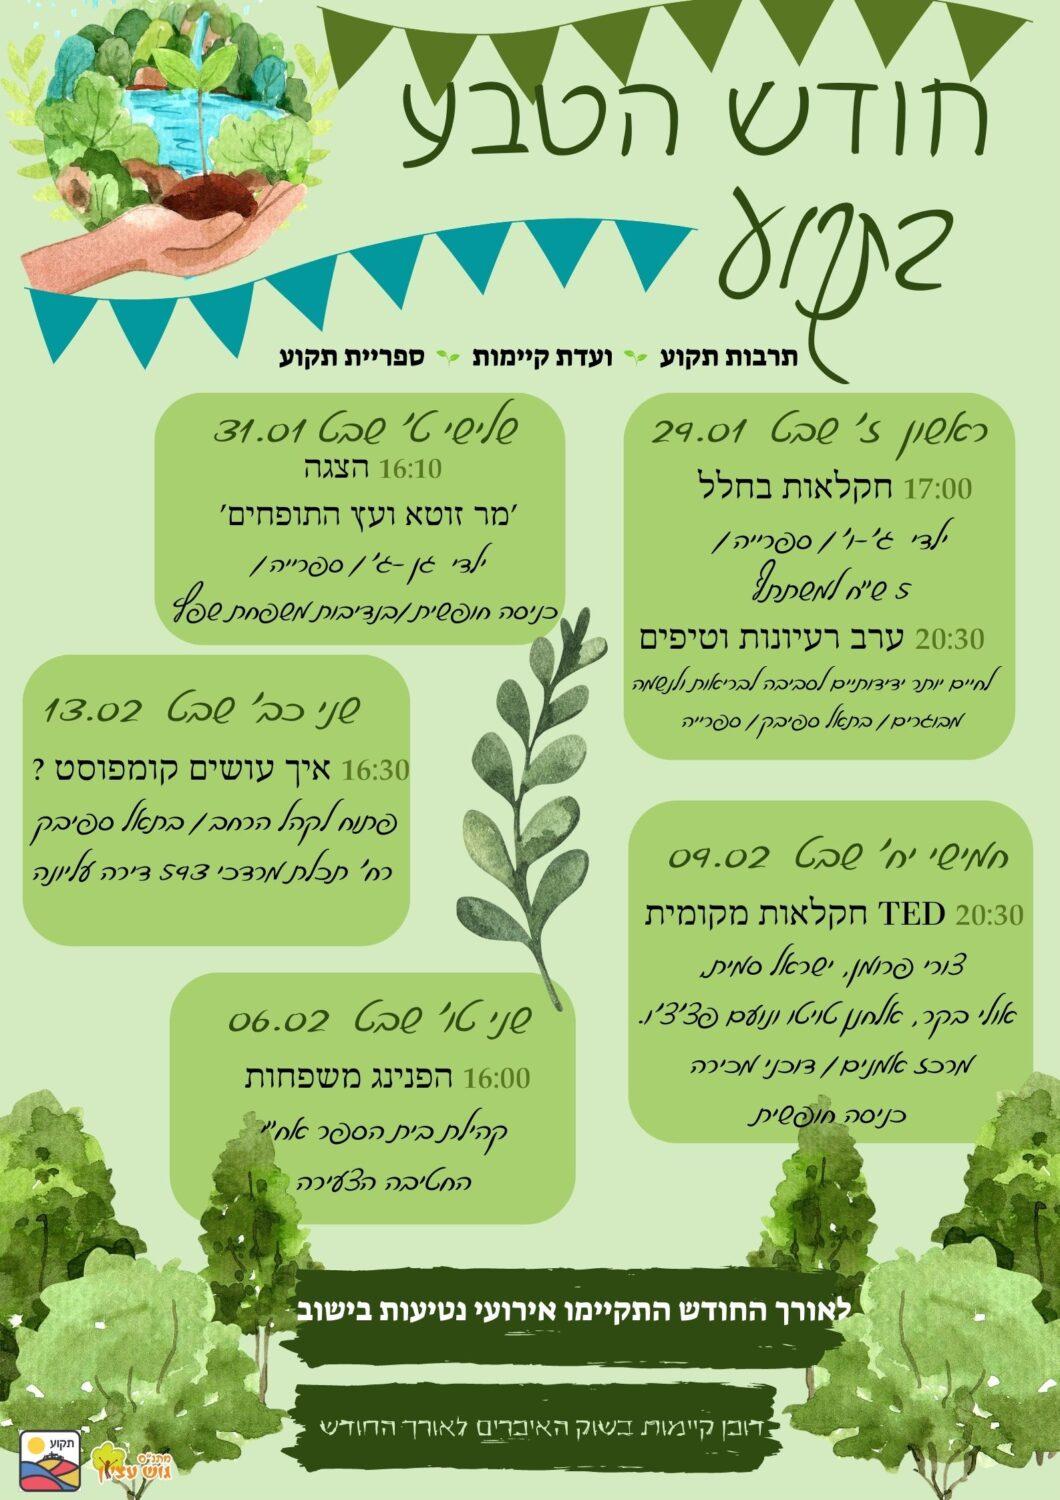 Green-Earth-Day-Poster